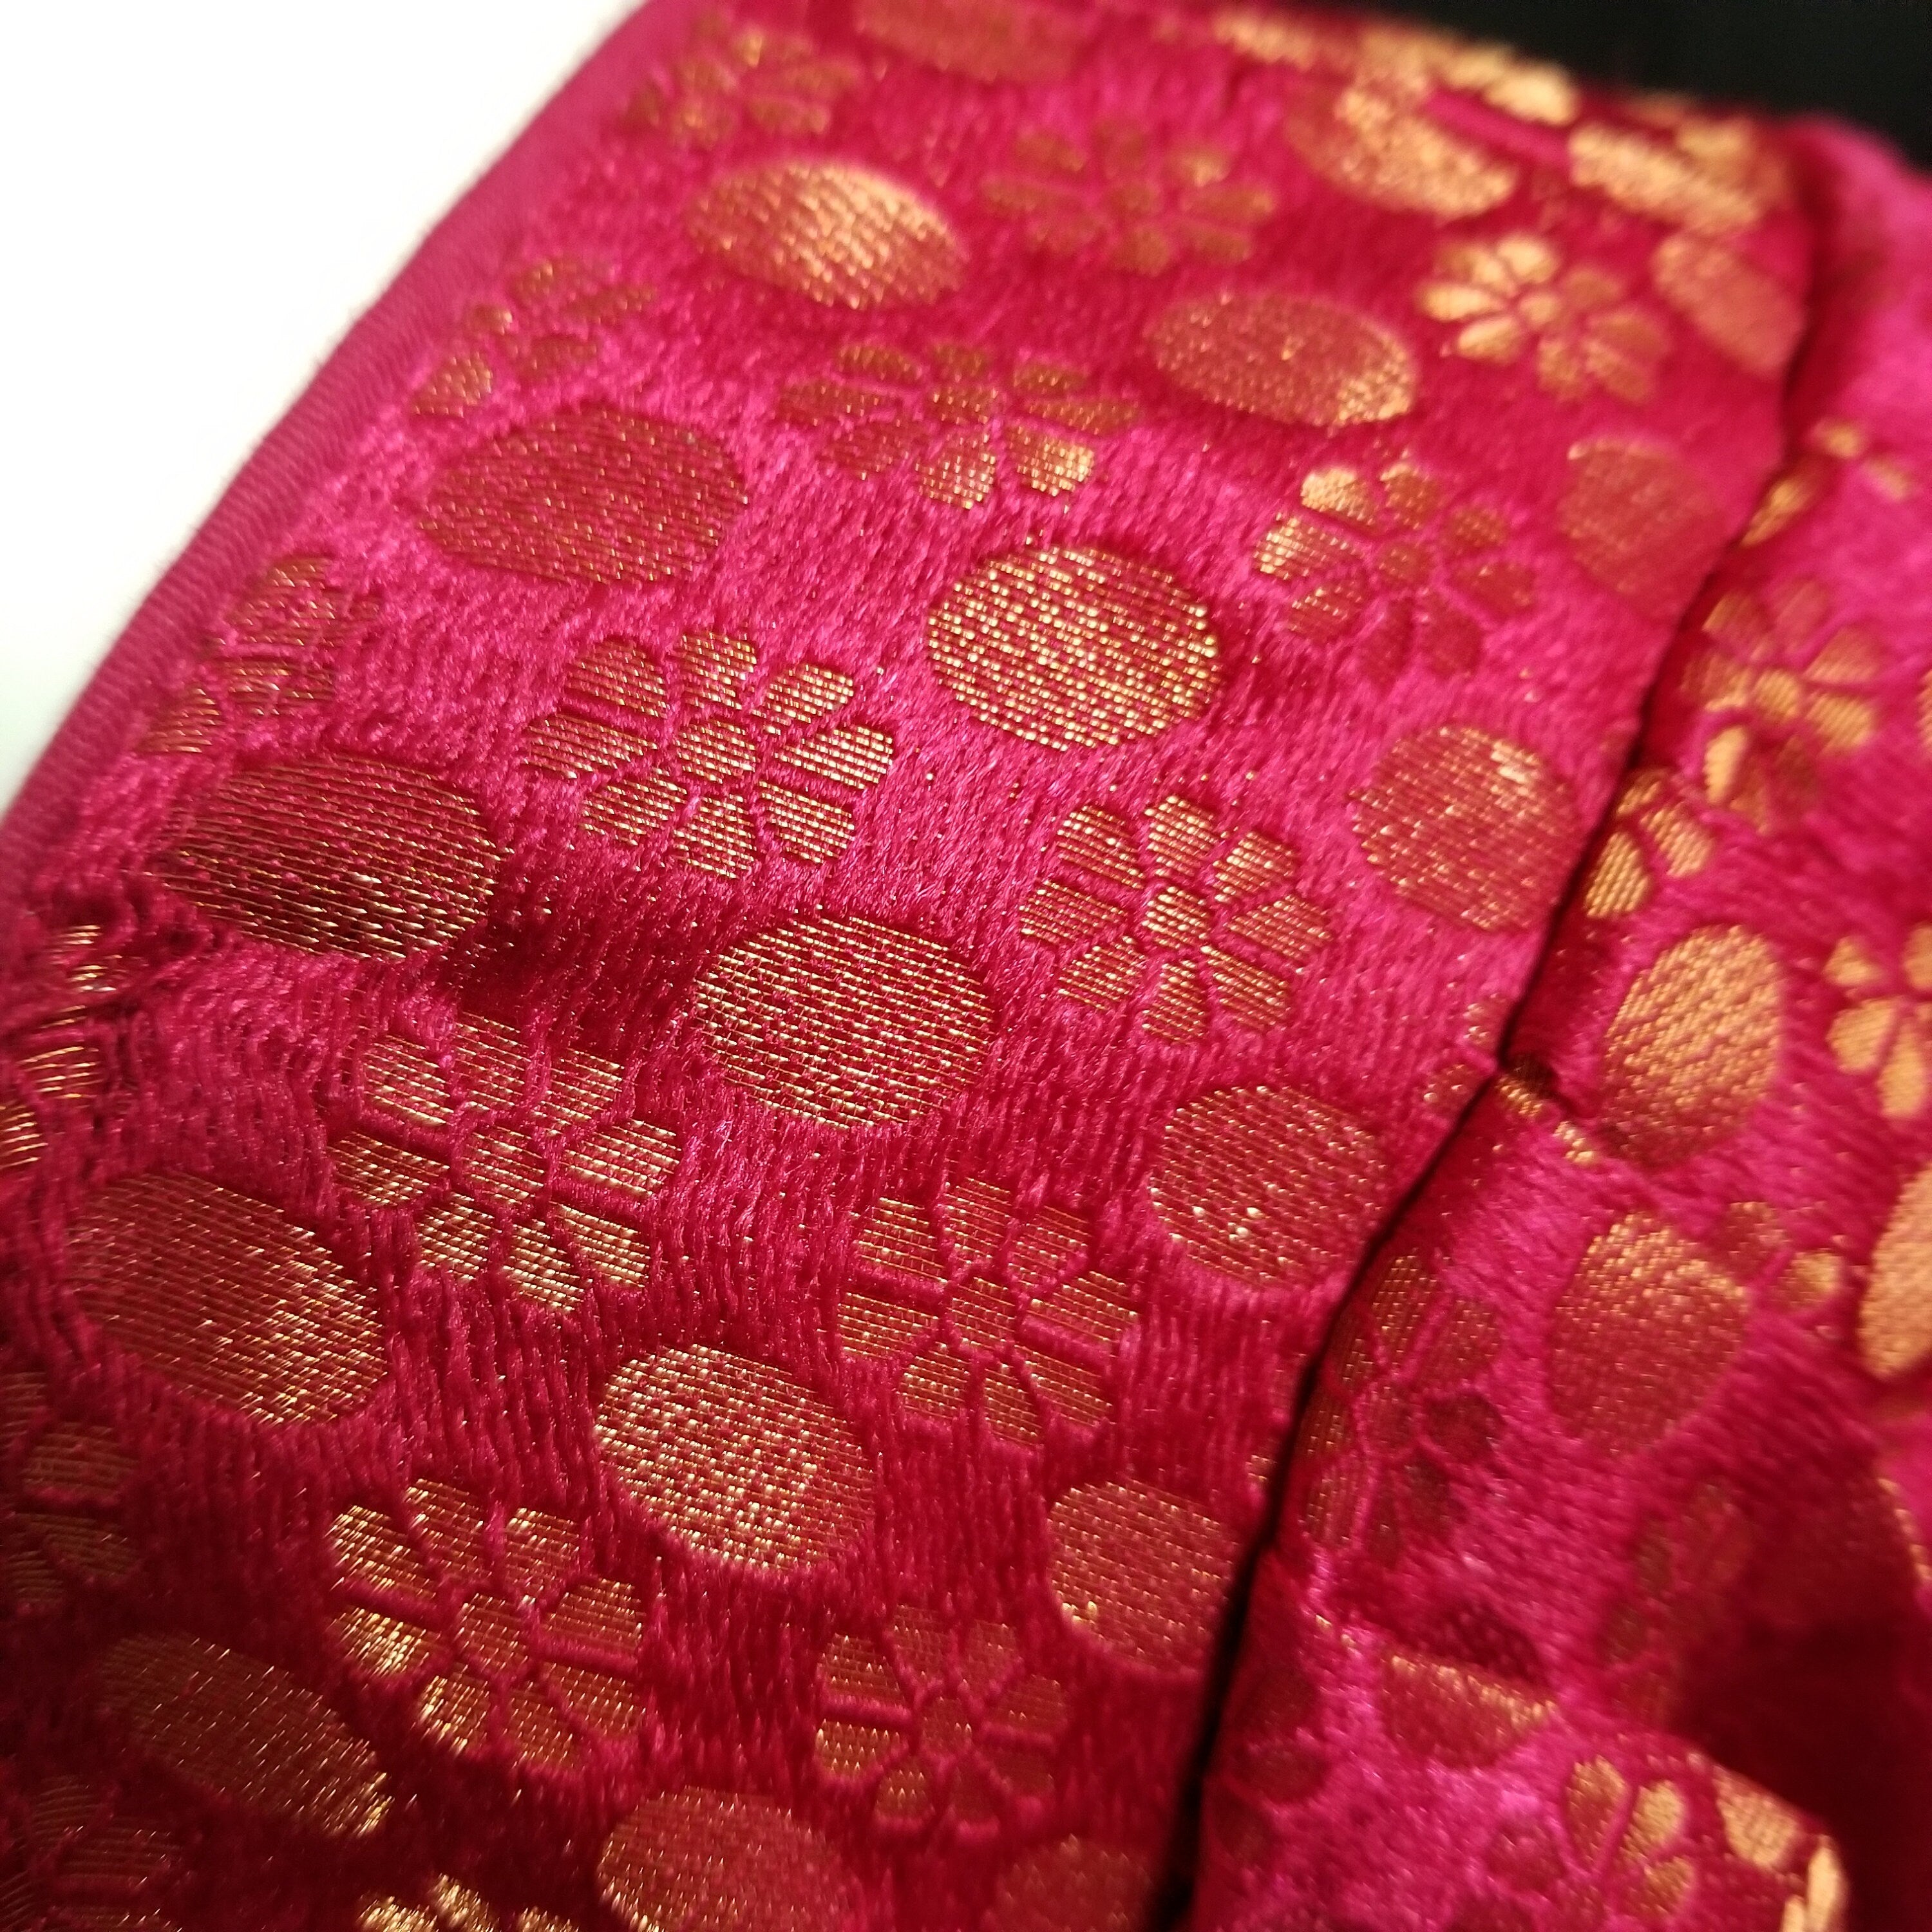 Readymade Saree Blouse - Dark Pink Puff Silk base Blouse - Princess cut with (removable) pad Blouse - size 36" (Can alter 34, 38)